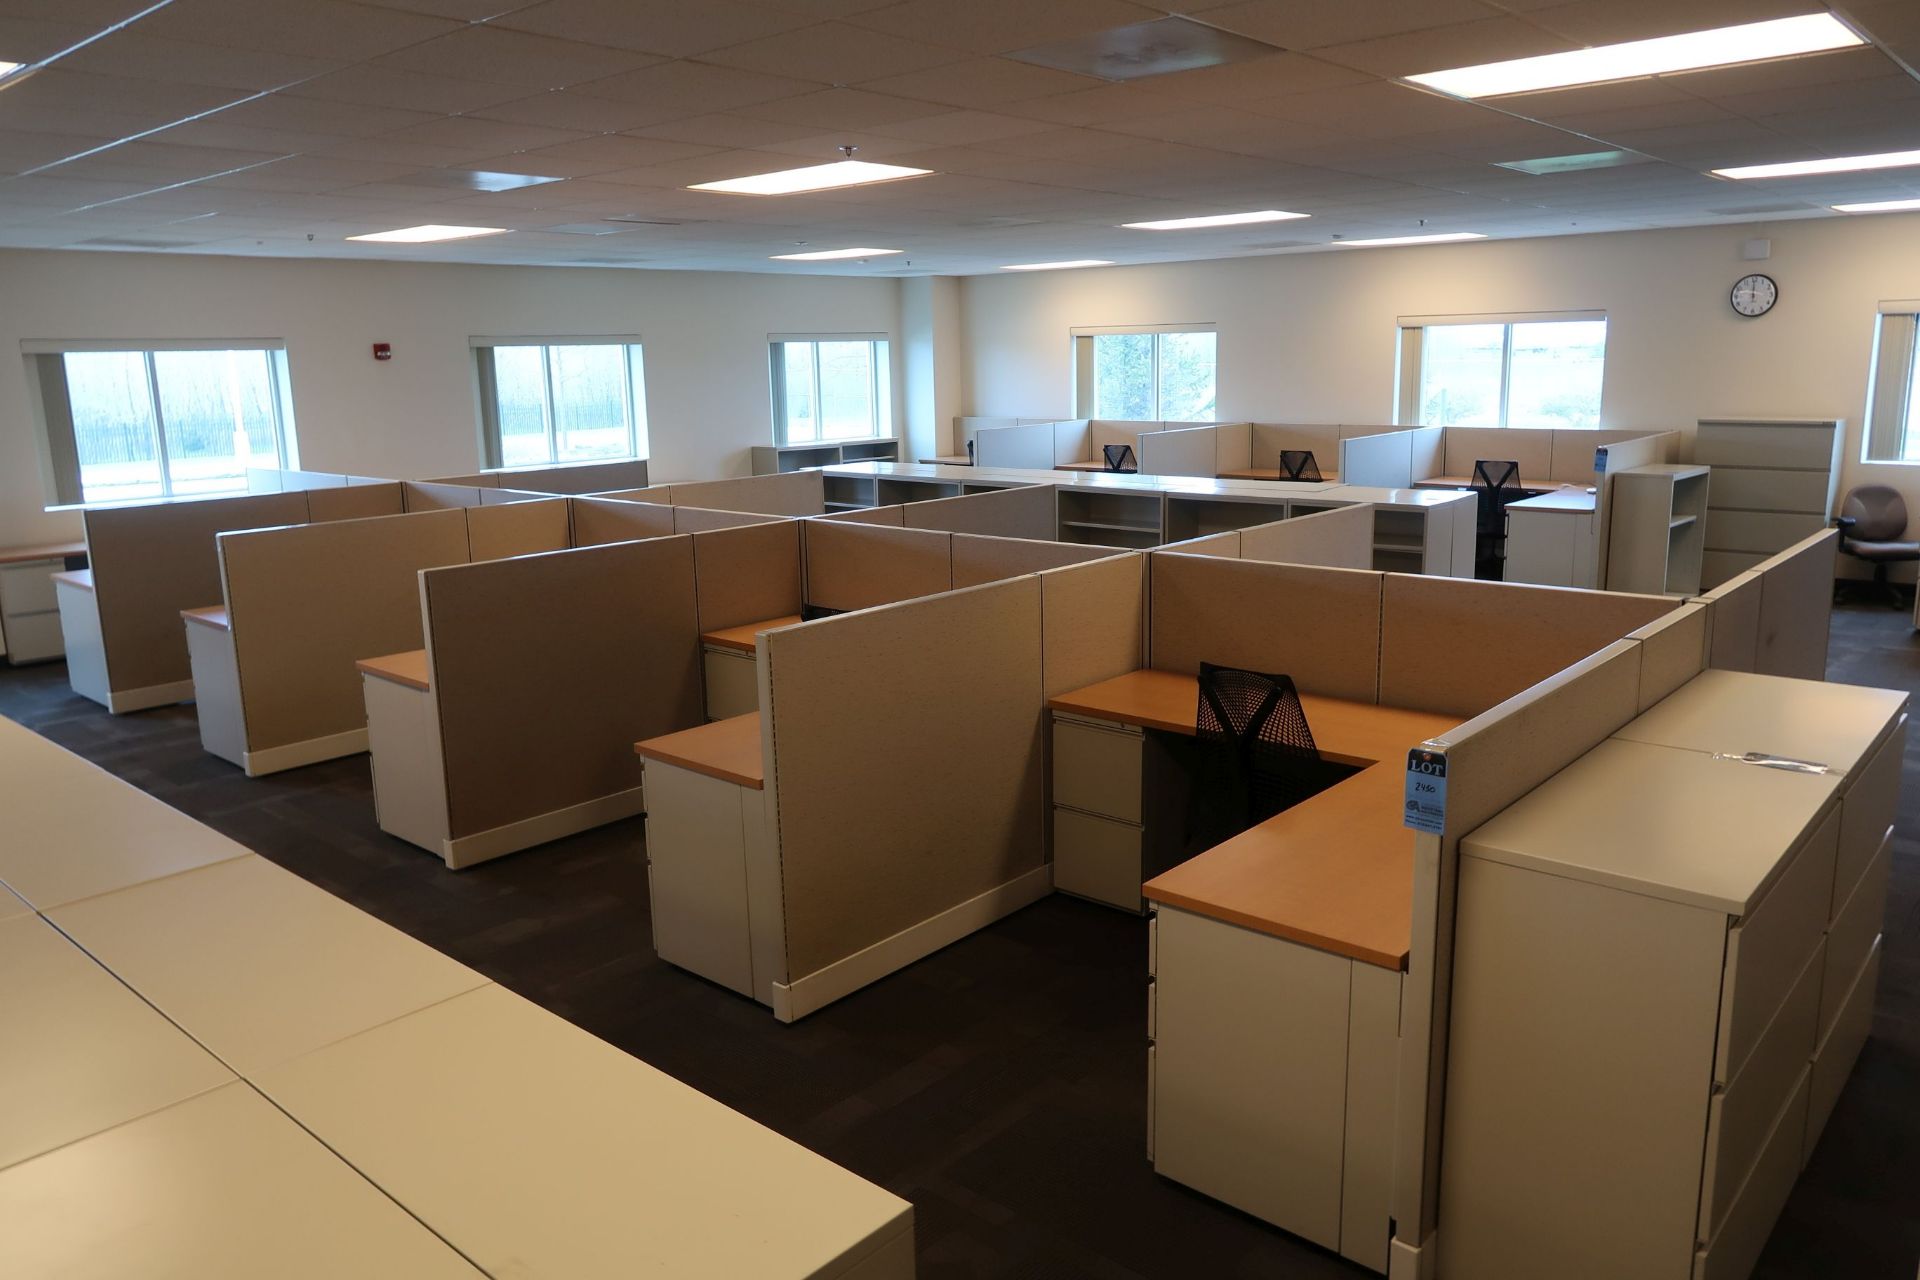 (LOT) 10-PERSON HERMAN MILLER CUBICLE SET 47" HIGH WALLS WITH CHAIRS